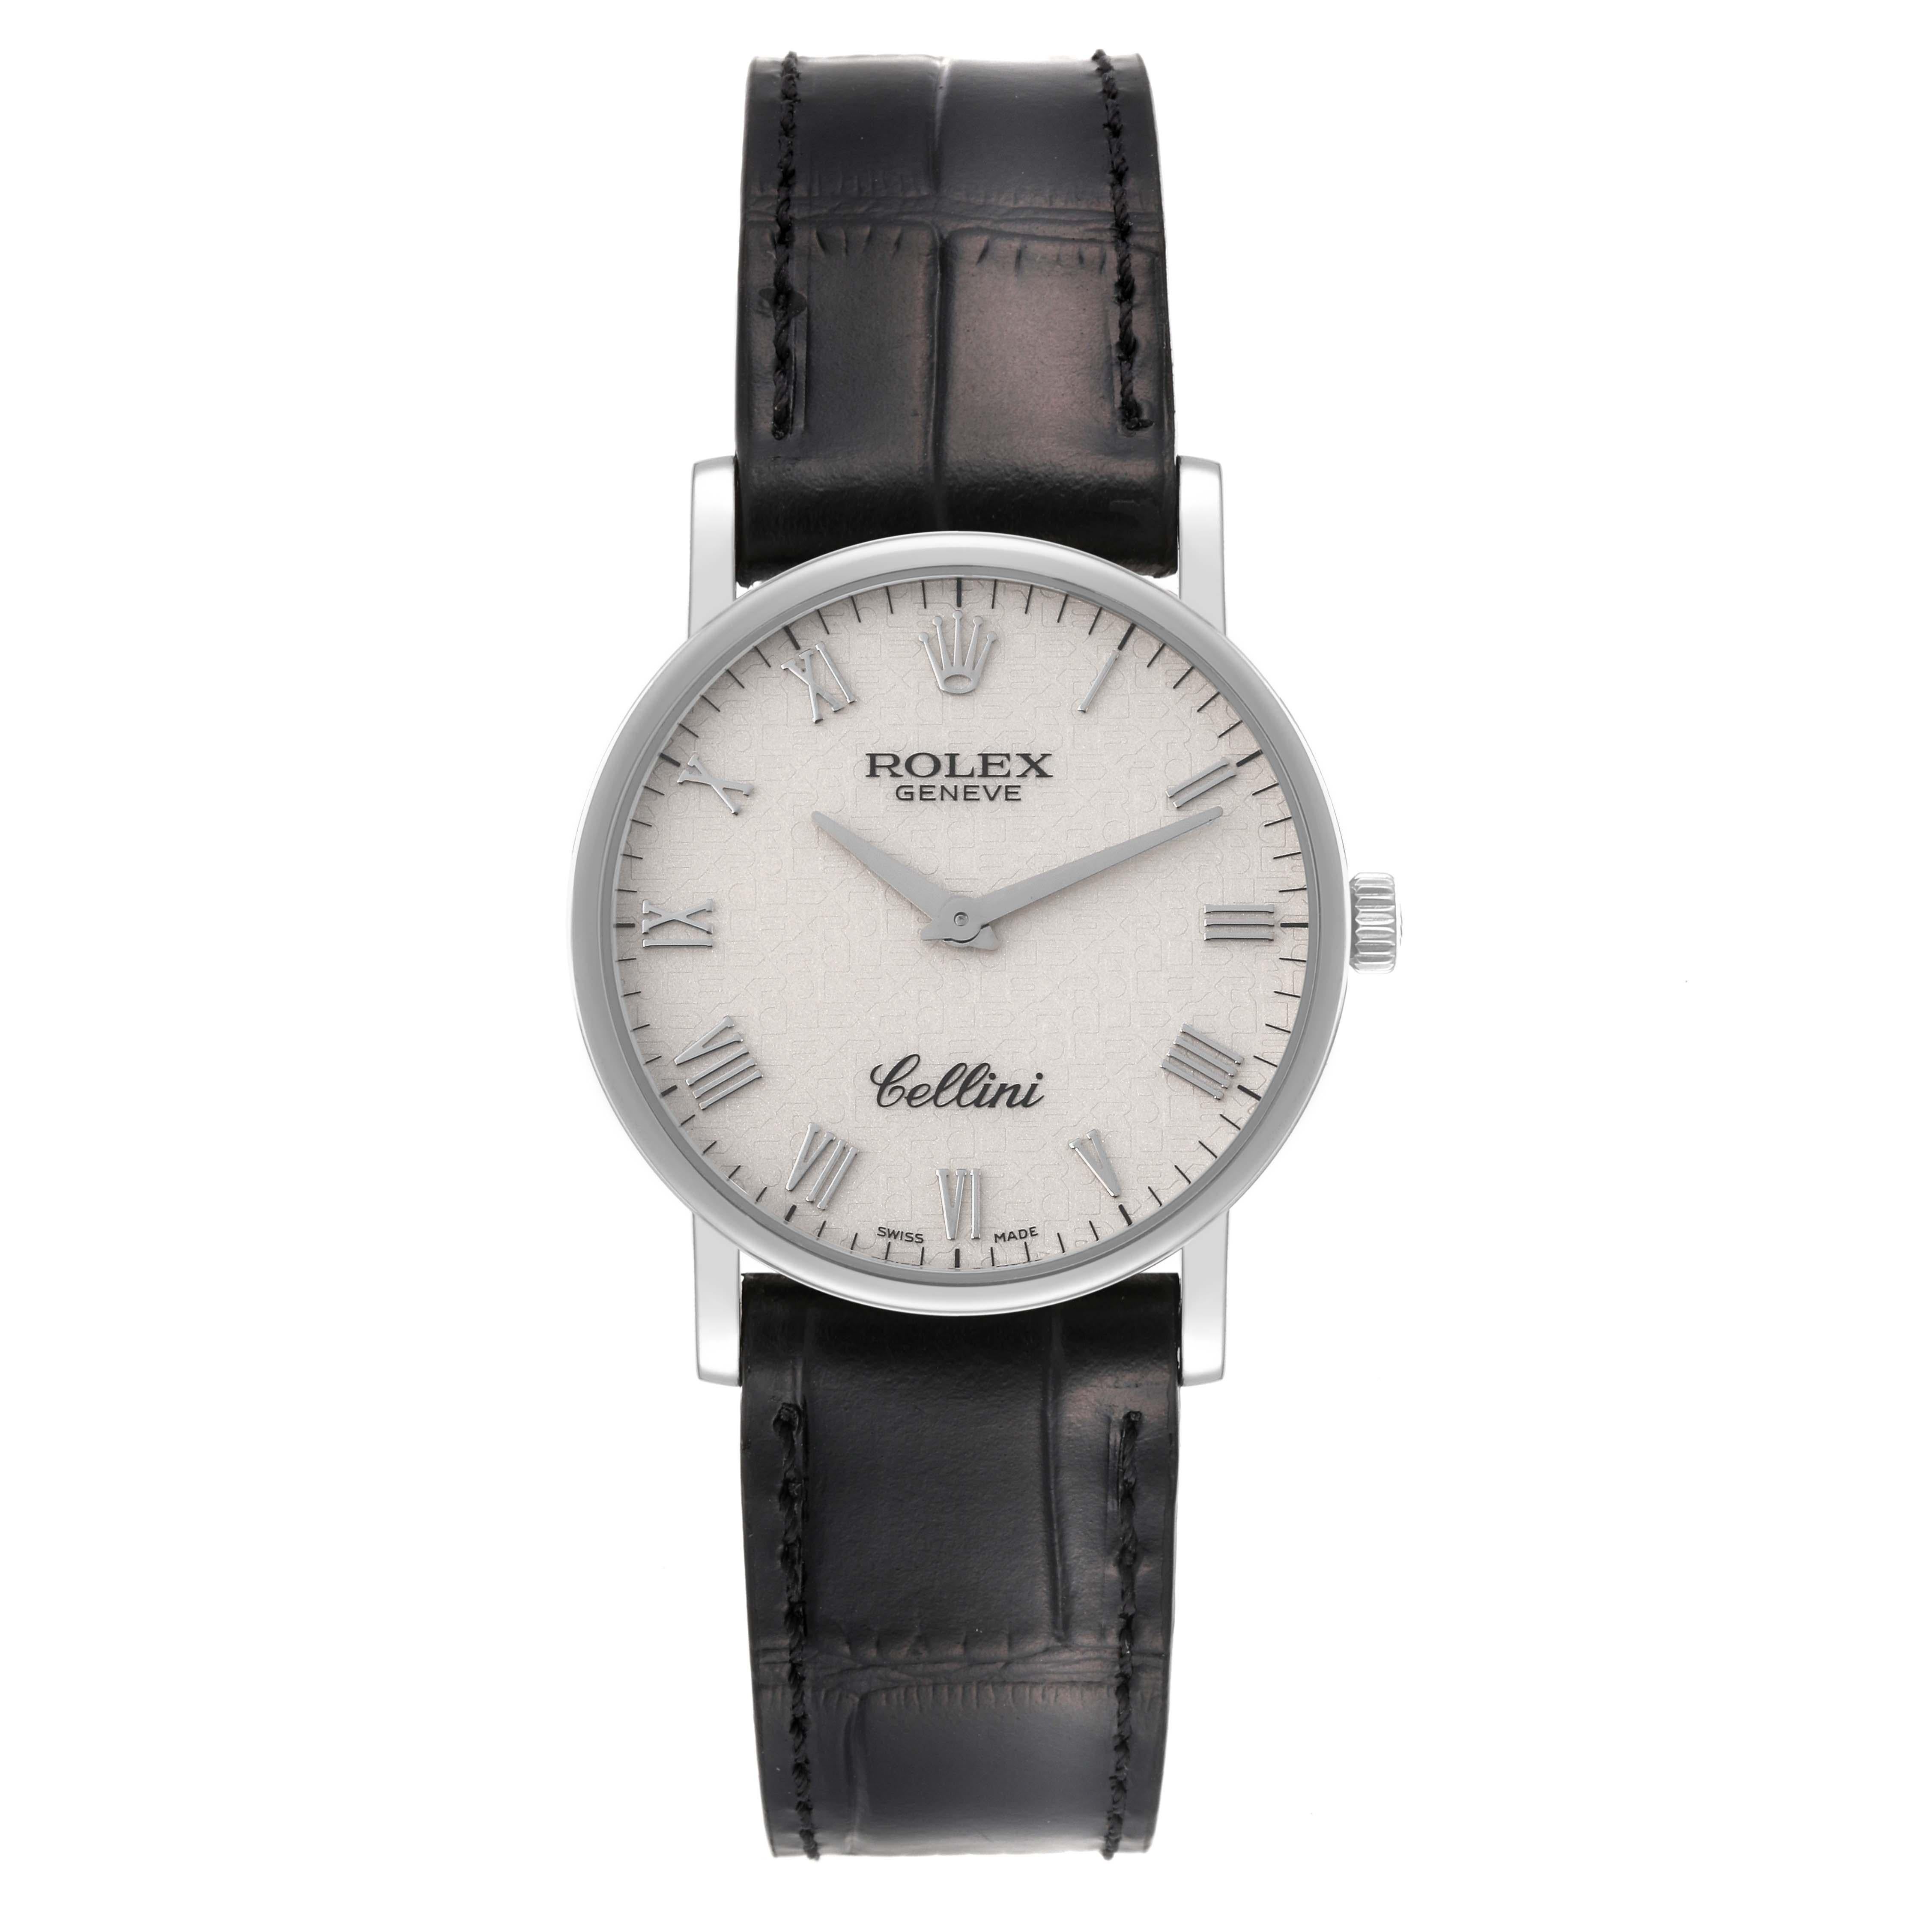 Rolex Cellini Classic White Gold Ivory Anniversary Dial Mens Watch 5115. Manual winding movement. 18K white gold slim case 32mm in diameter. 5.5mm case thickness. Rolex logo on the crown. . Scratch resistant sapphire crystal. Flat profile. Ivory